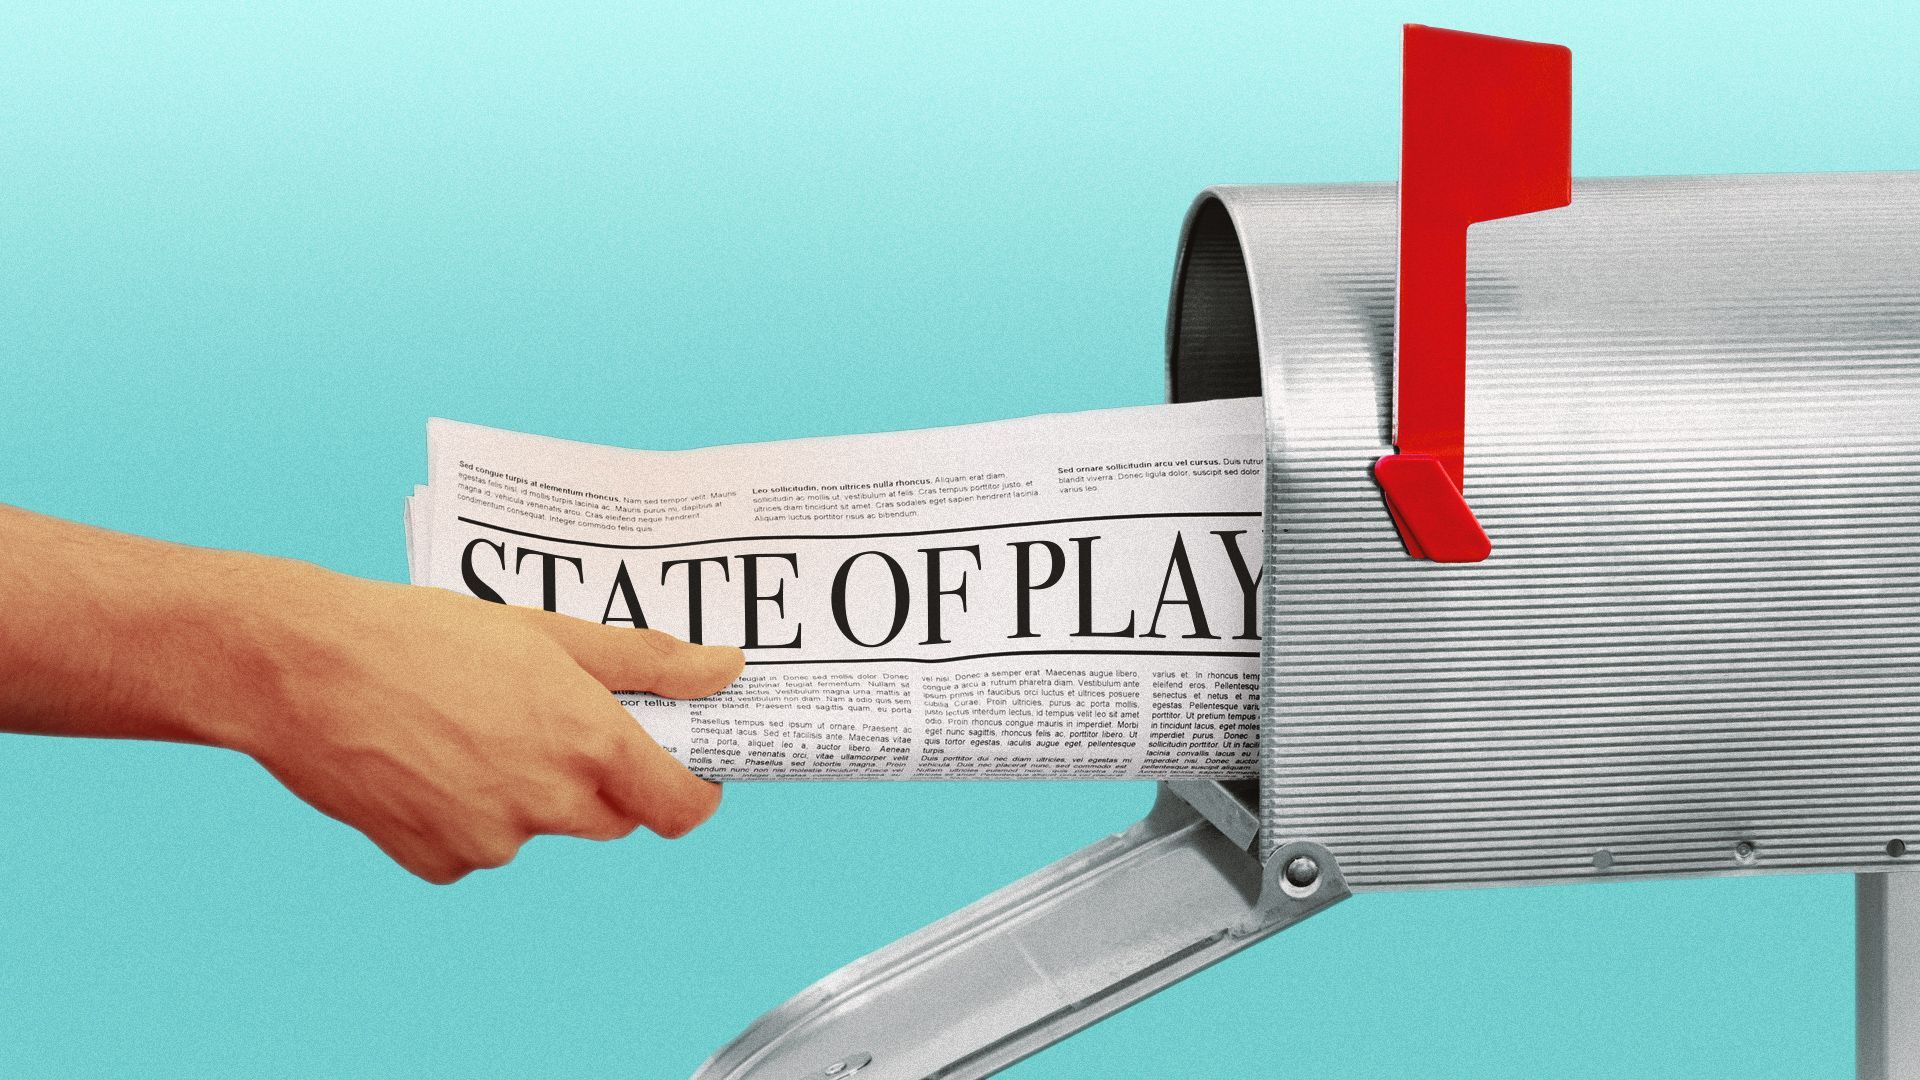 Illustration of a person retrieving a newspaper with the headline "State of Play" from a mailbox.